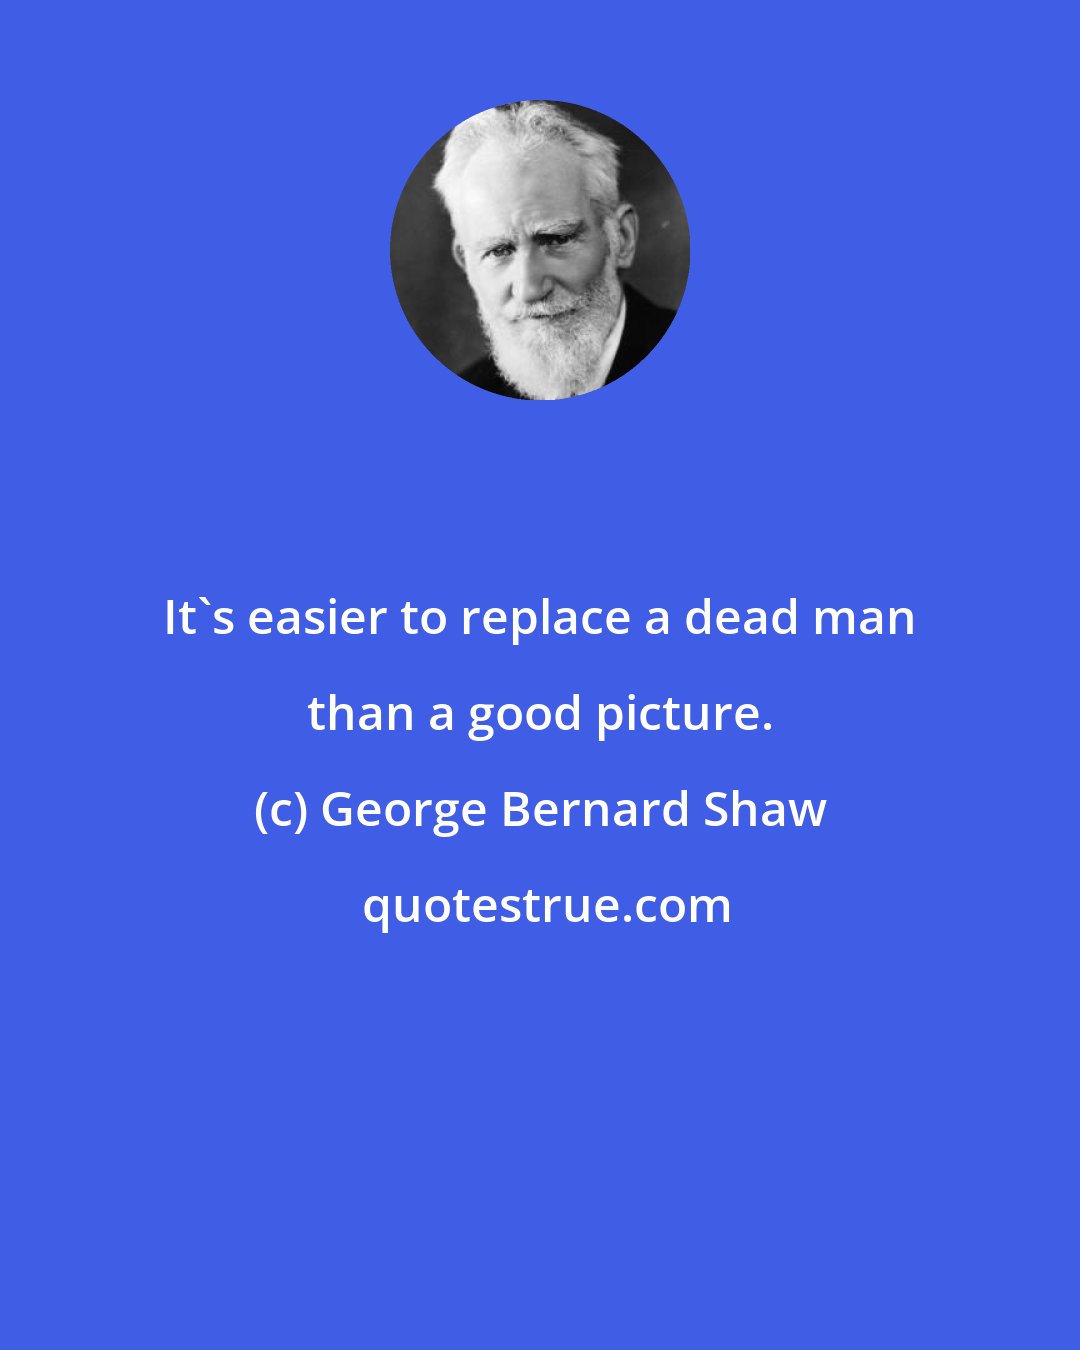 George Bernard Shaw: It's easier to replace a dead man than a good picture.